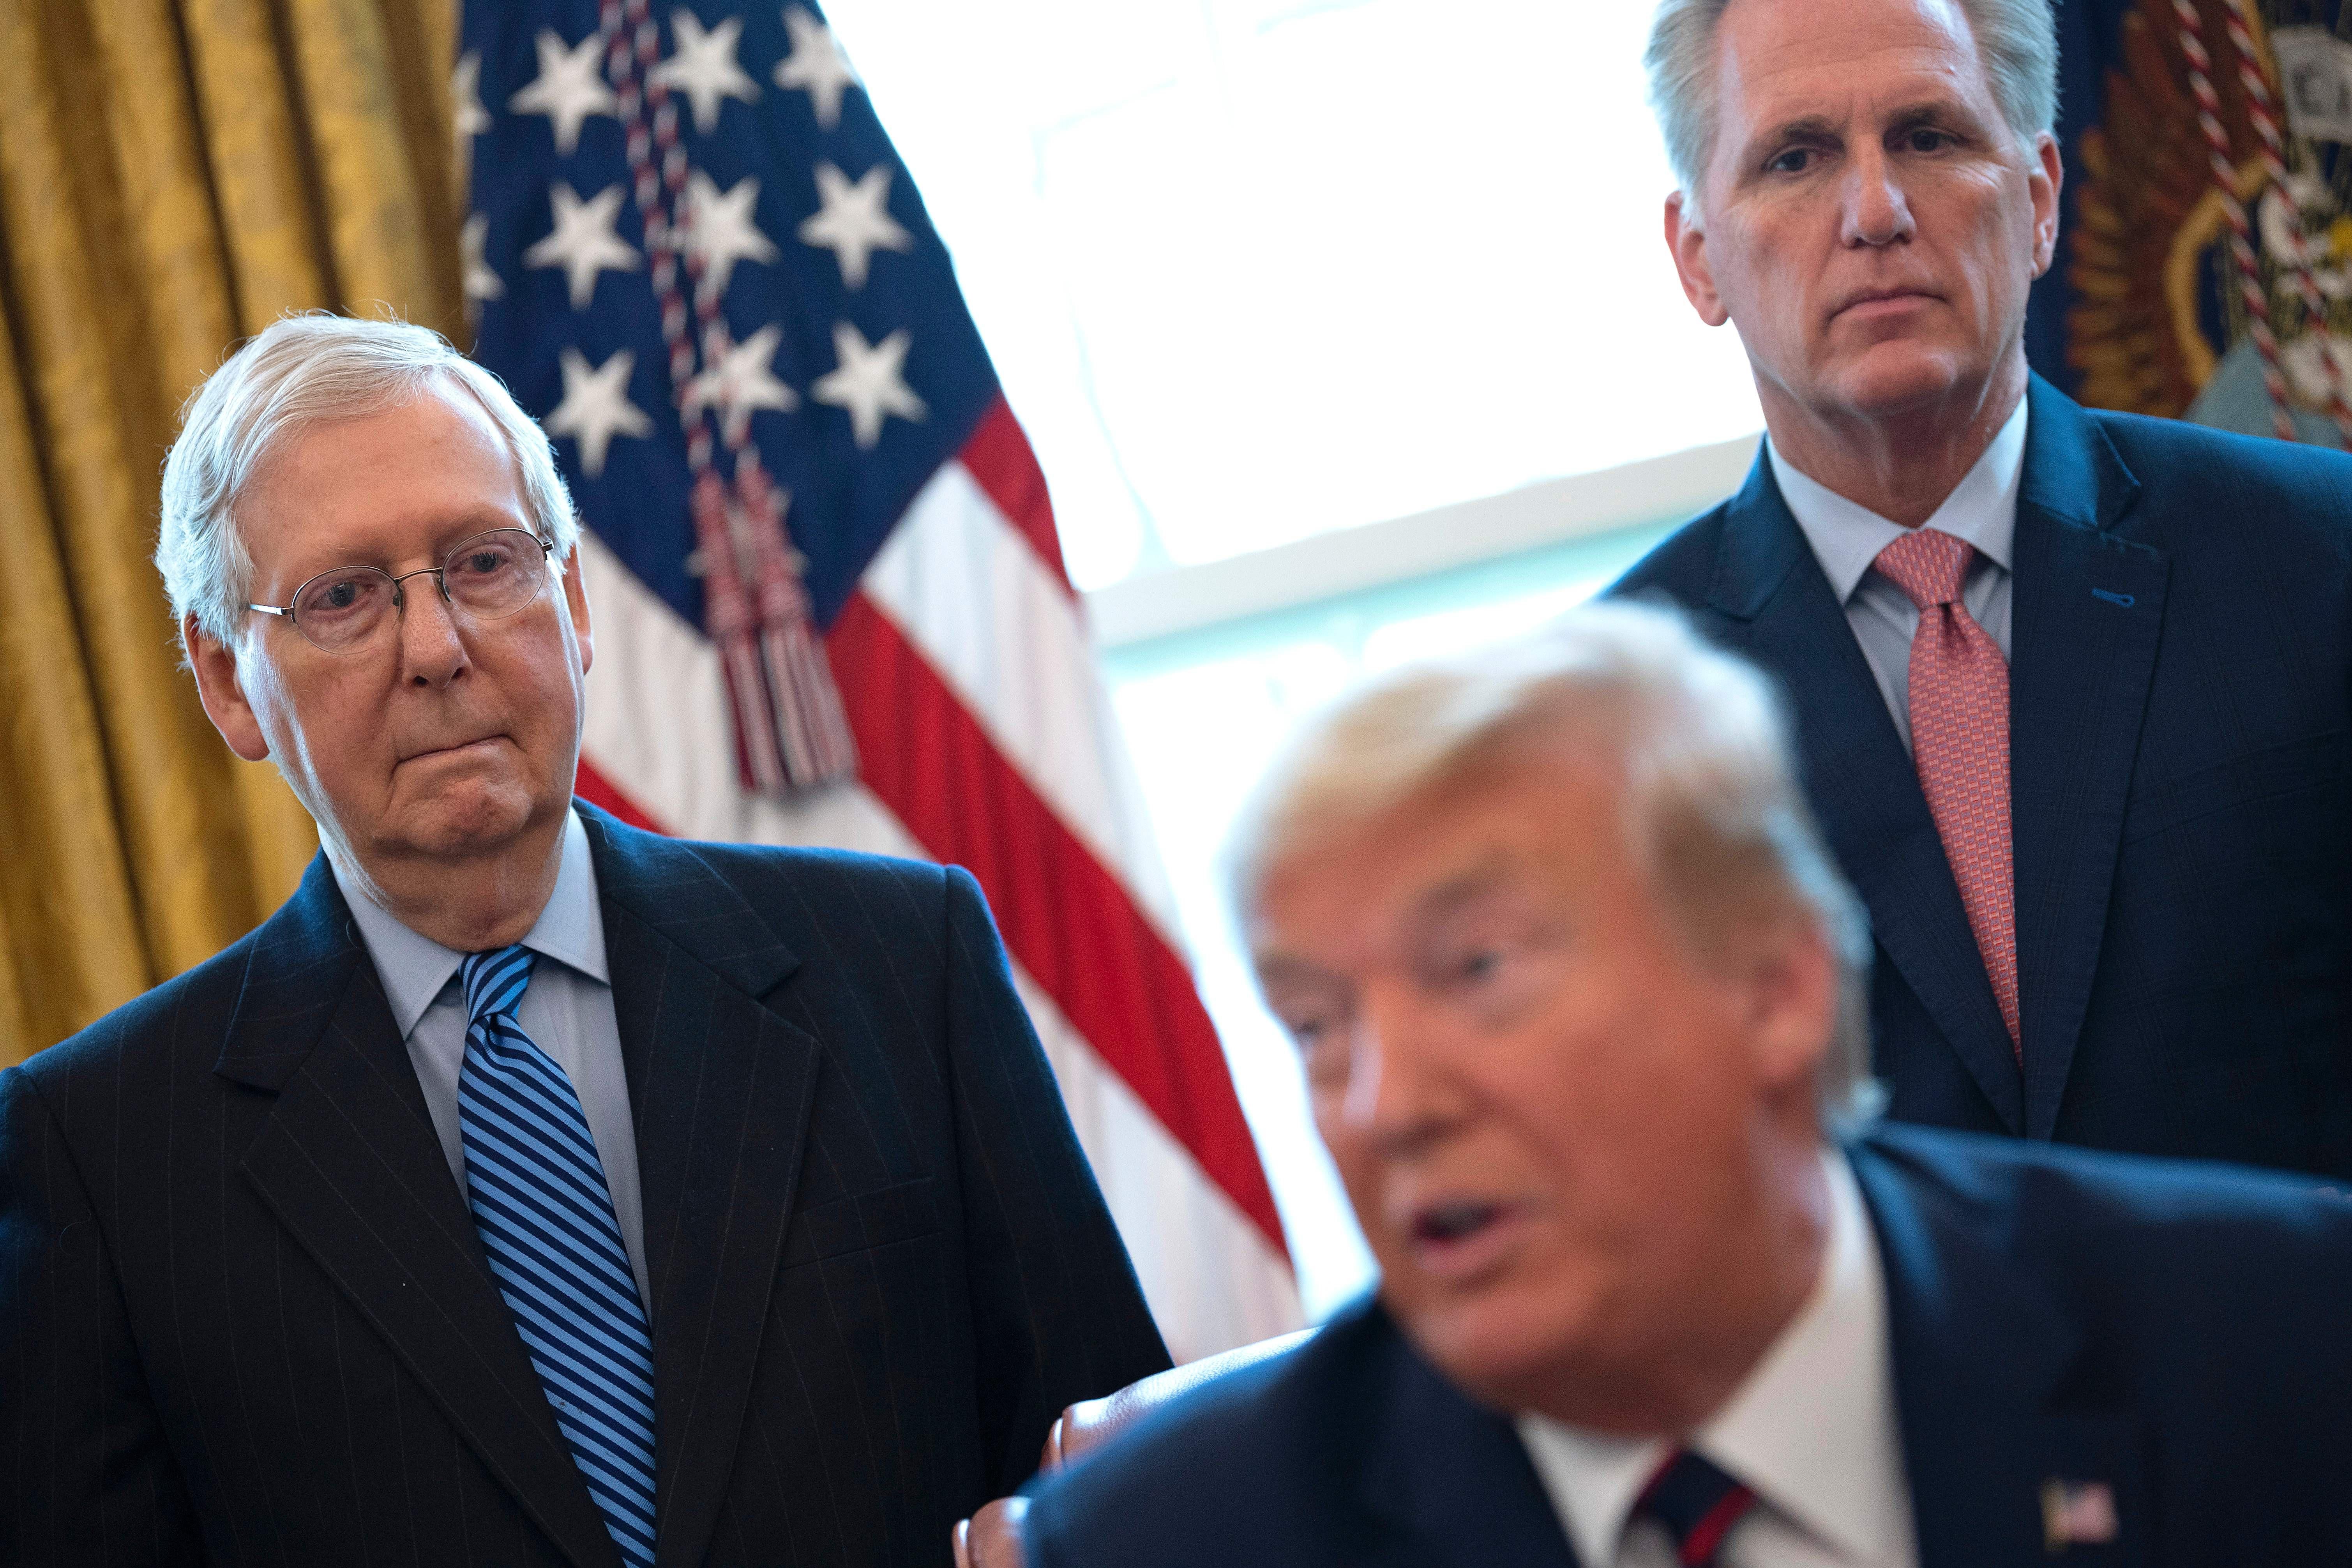 Mitch McConnell and Kevin McCarthy stand behind and look at Donald Trump.